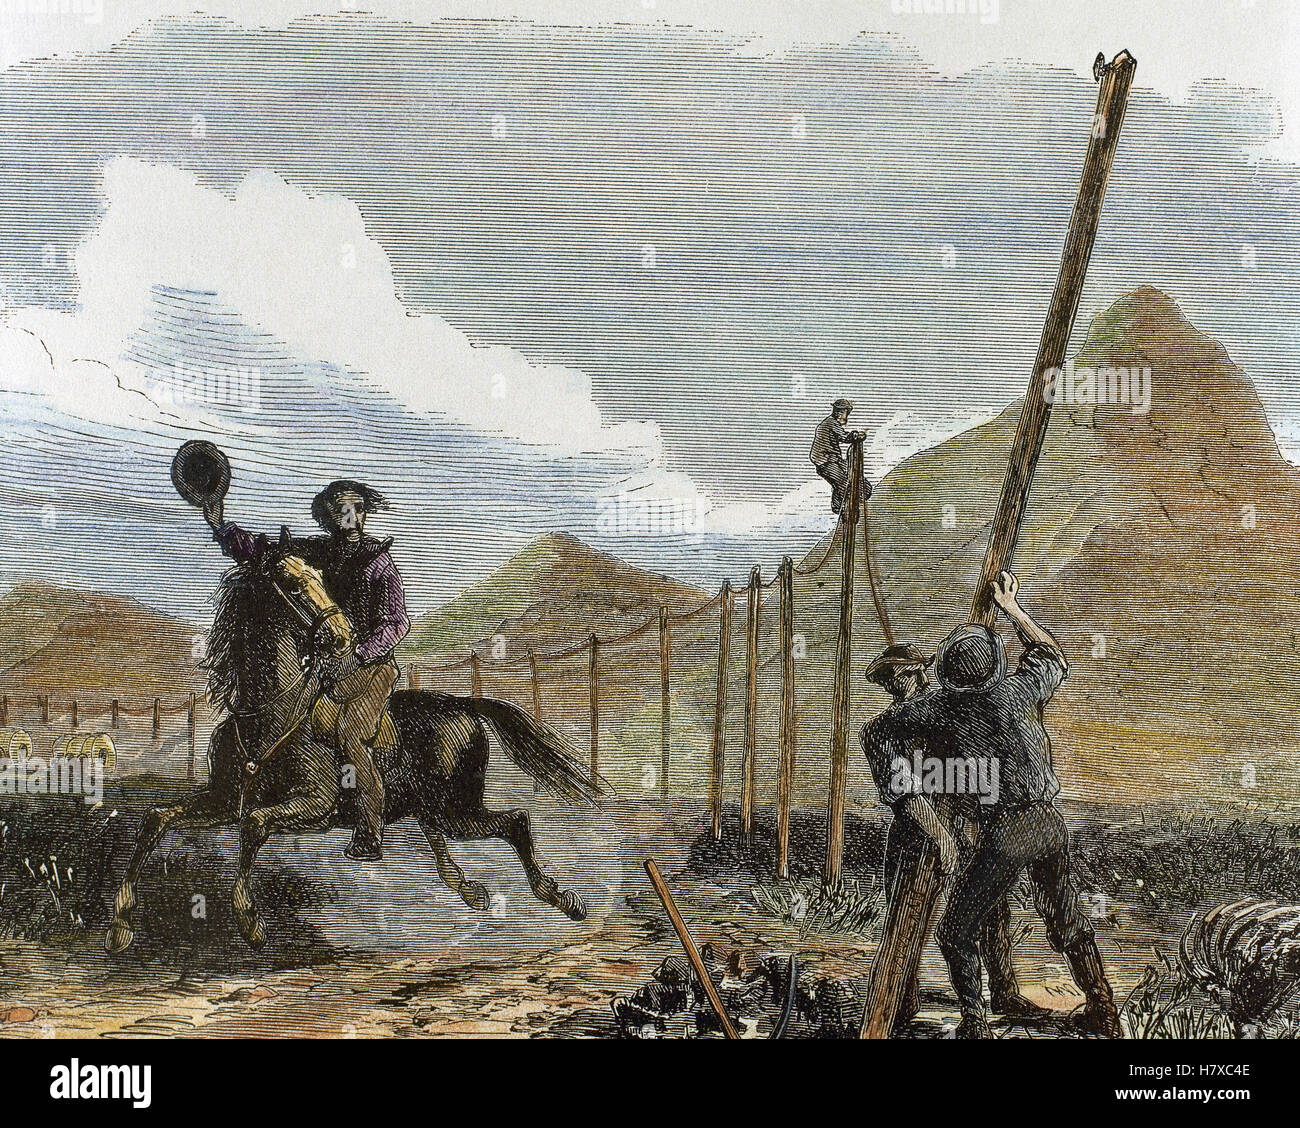 The United States. American West. 19th century. Telegraph installation. Workers installing new telegraph poles near Nebraska mountains. Colored engraving. Stock Photo